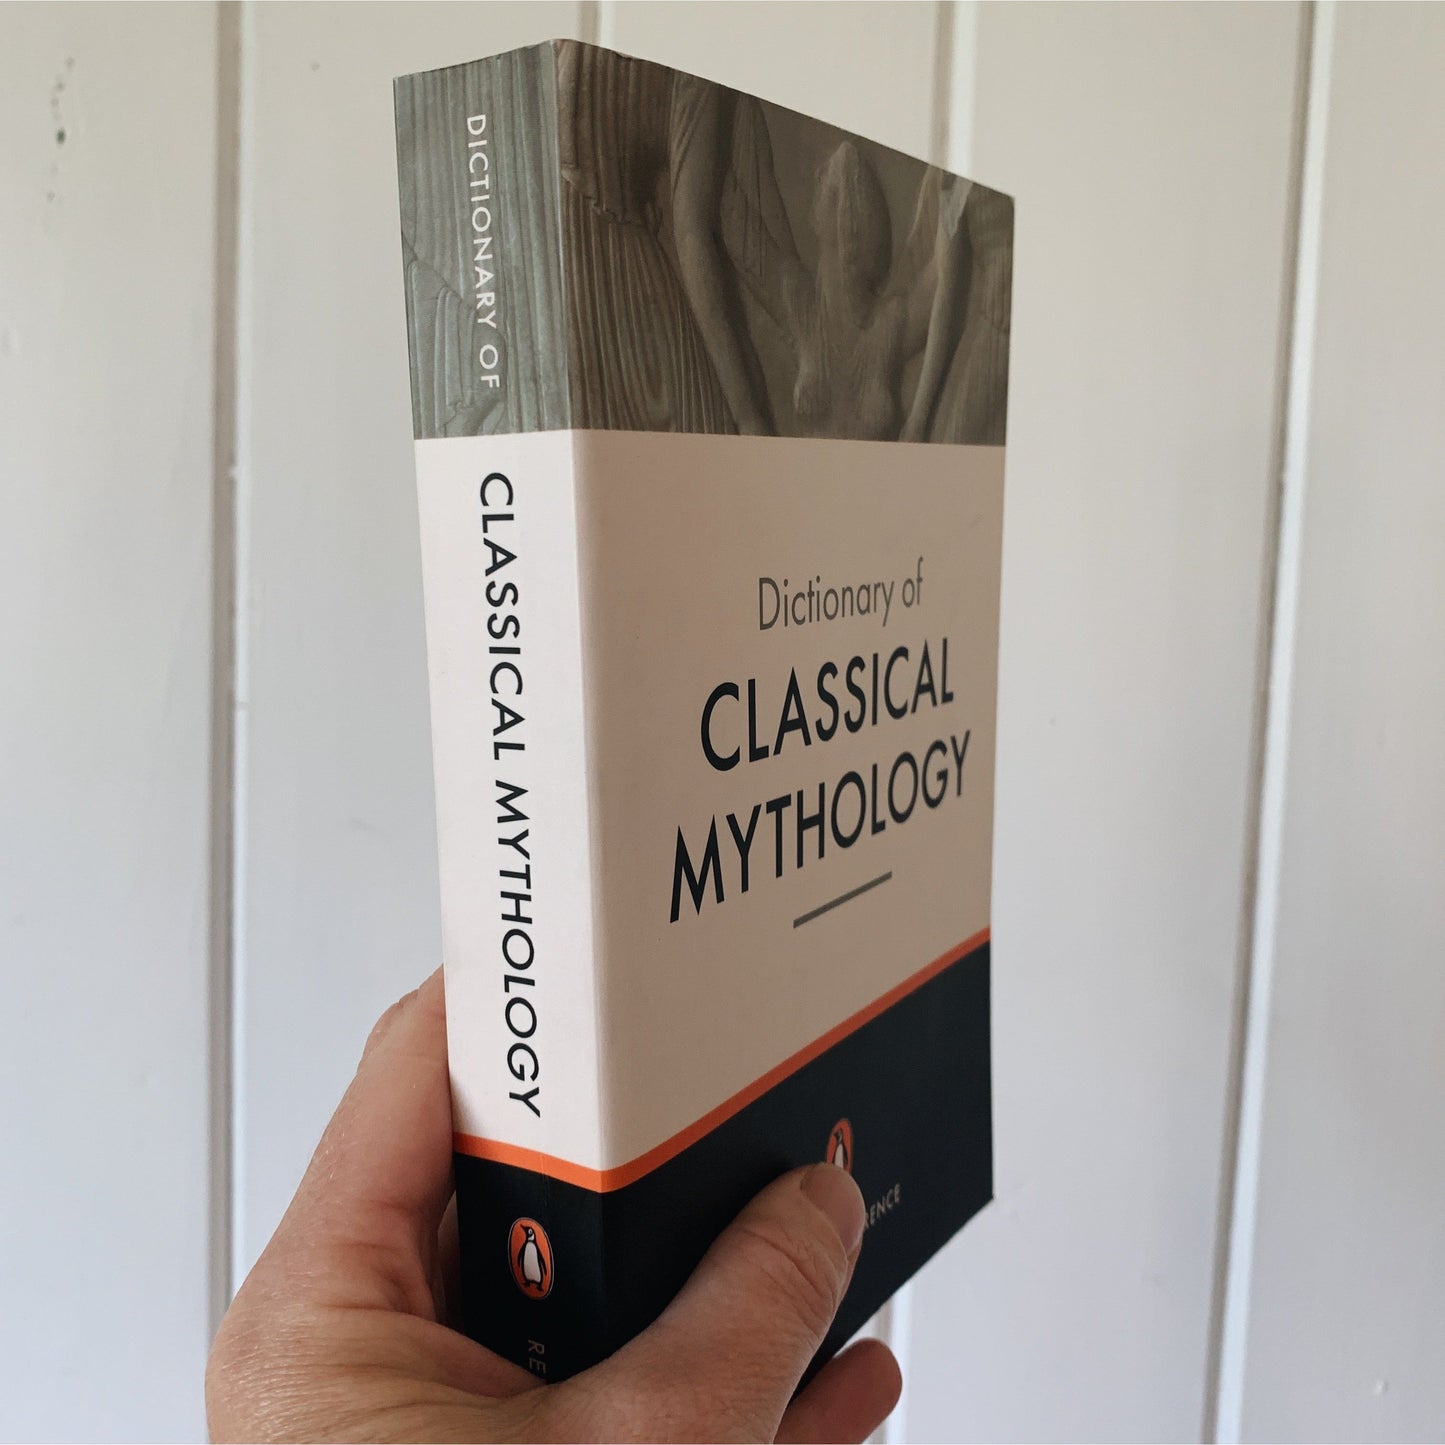 Dictionary of Classical Mythology, Penguin Reference, 1991